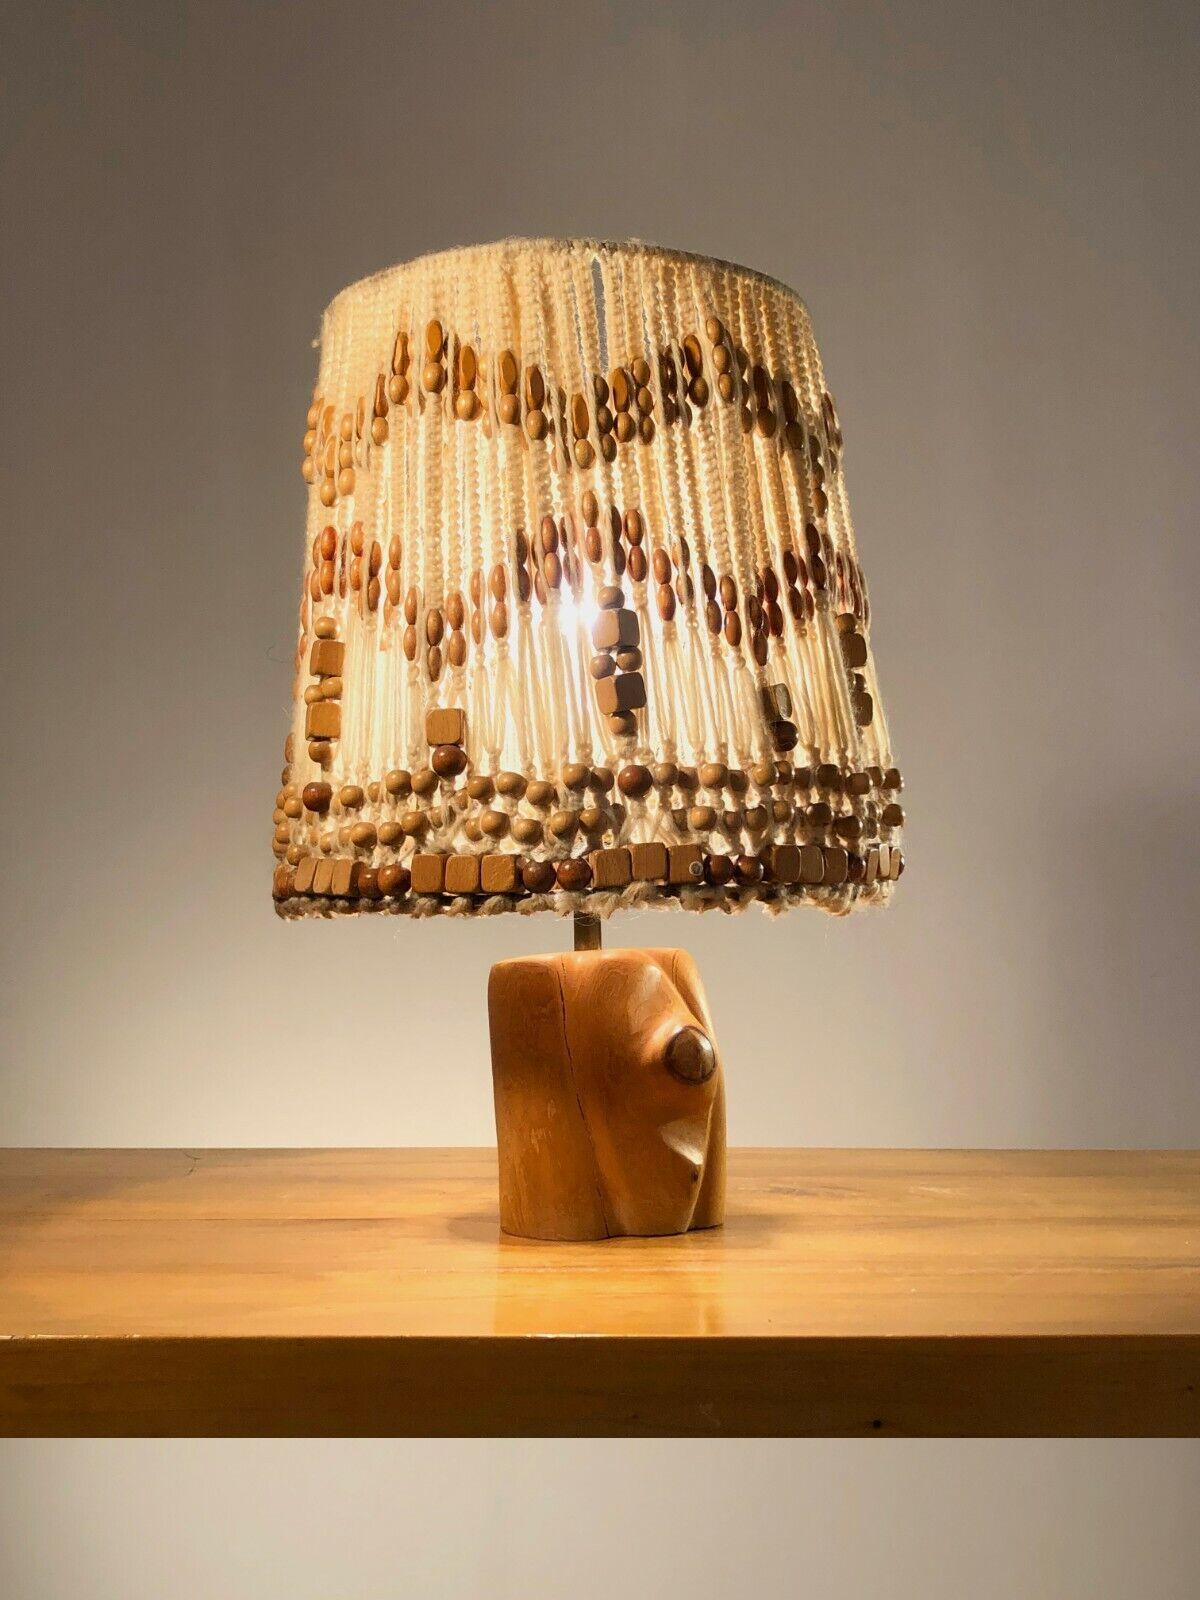 A Sculptural MID-CENTURY-MODERN BRUTALIST RUSTIC Wood TABLE LAMP,  France 1950 For Sale 8